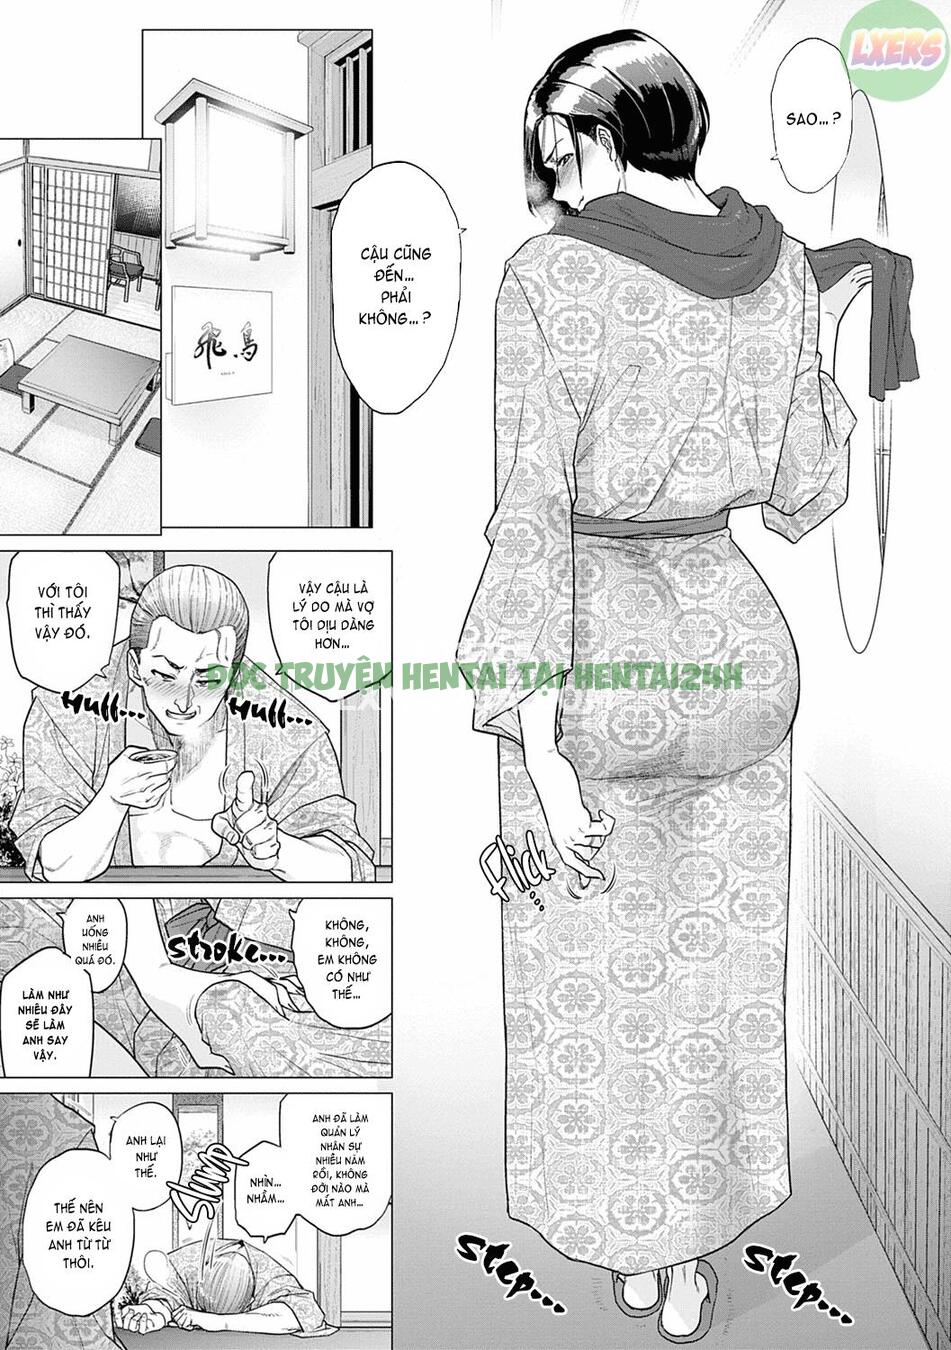 Xem ảnh Futei With - Chapter 8 END - 2 - Hentai24h.Tv